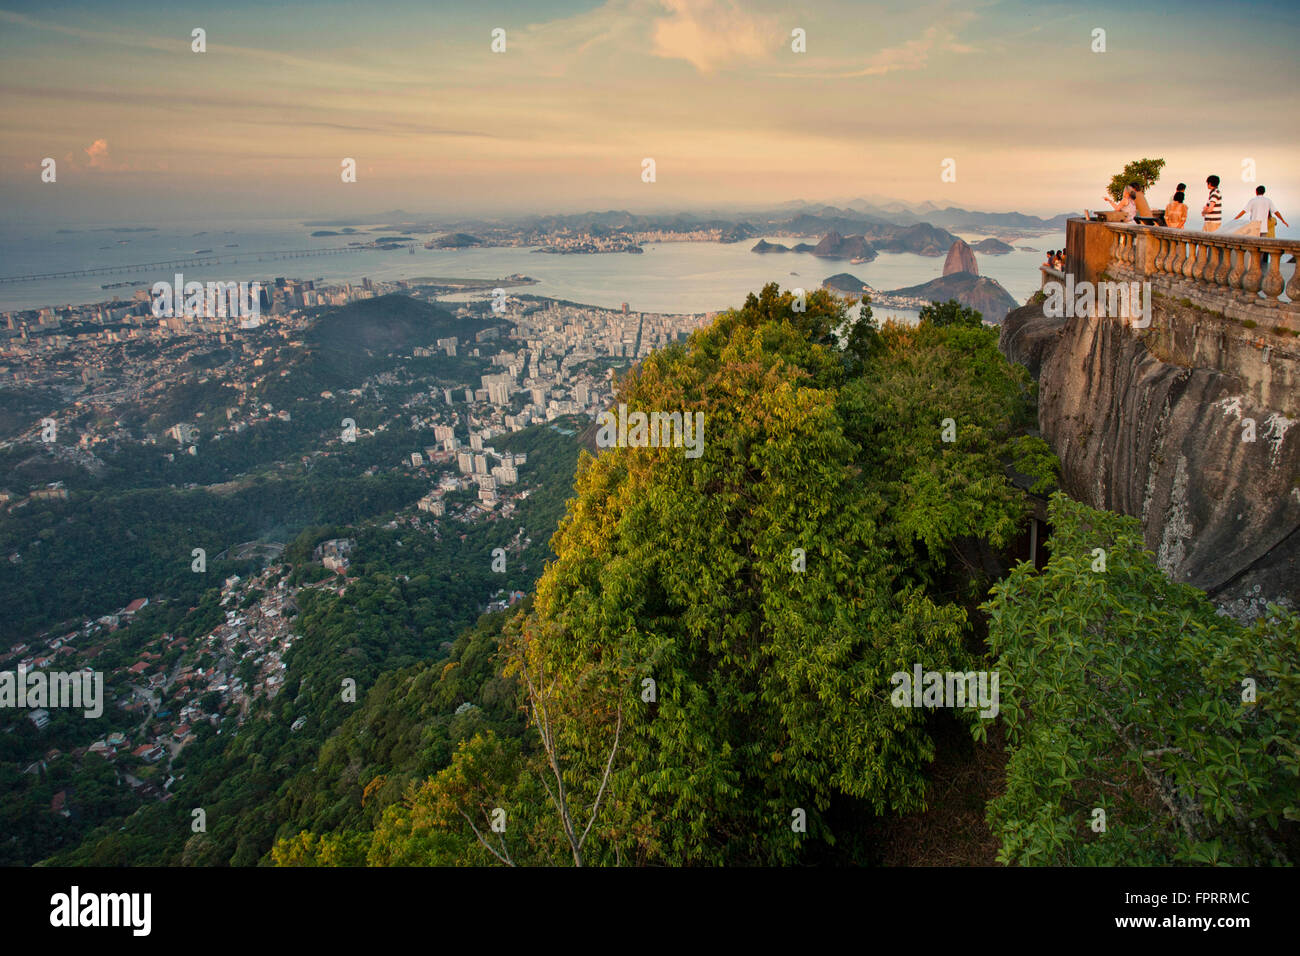 View of Guanabara Bay, Rio from the platform in front of the Christ statue Stock Photo